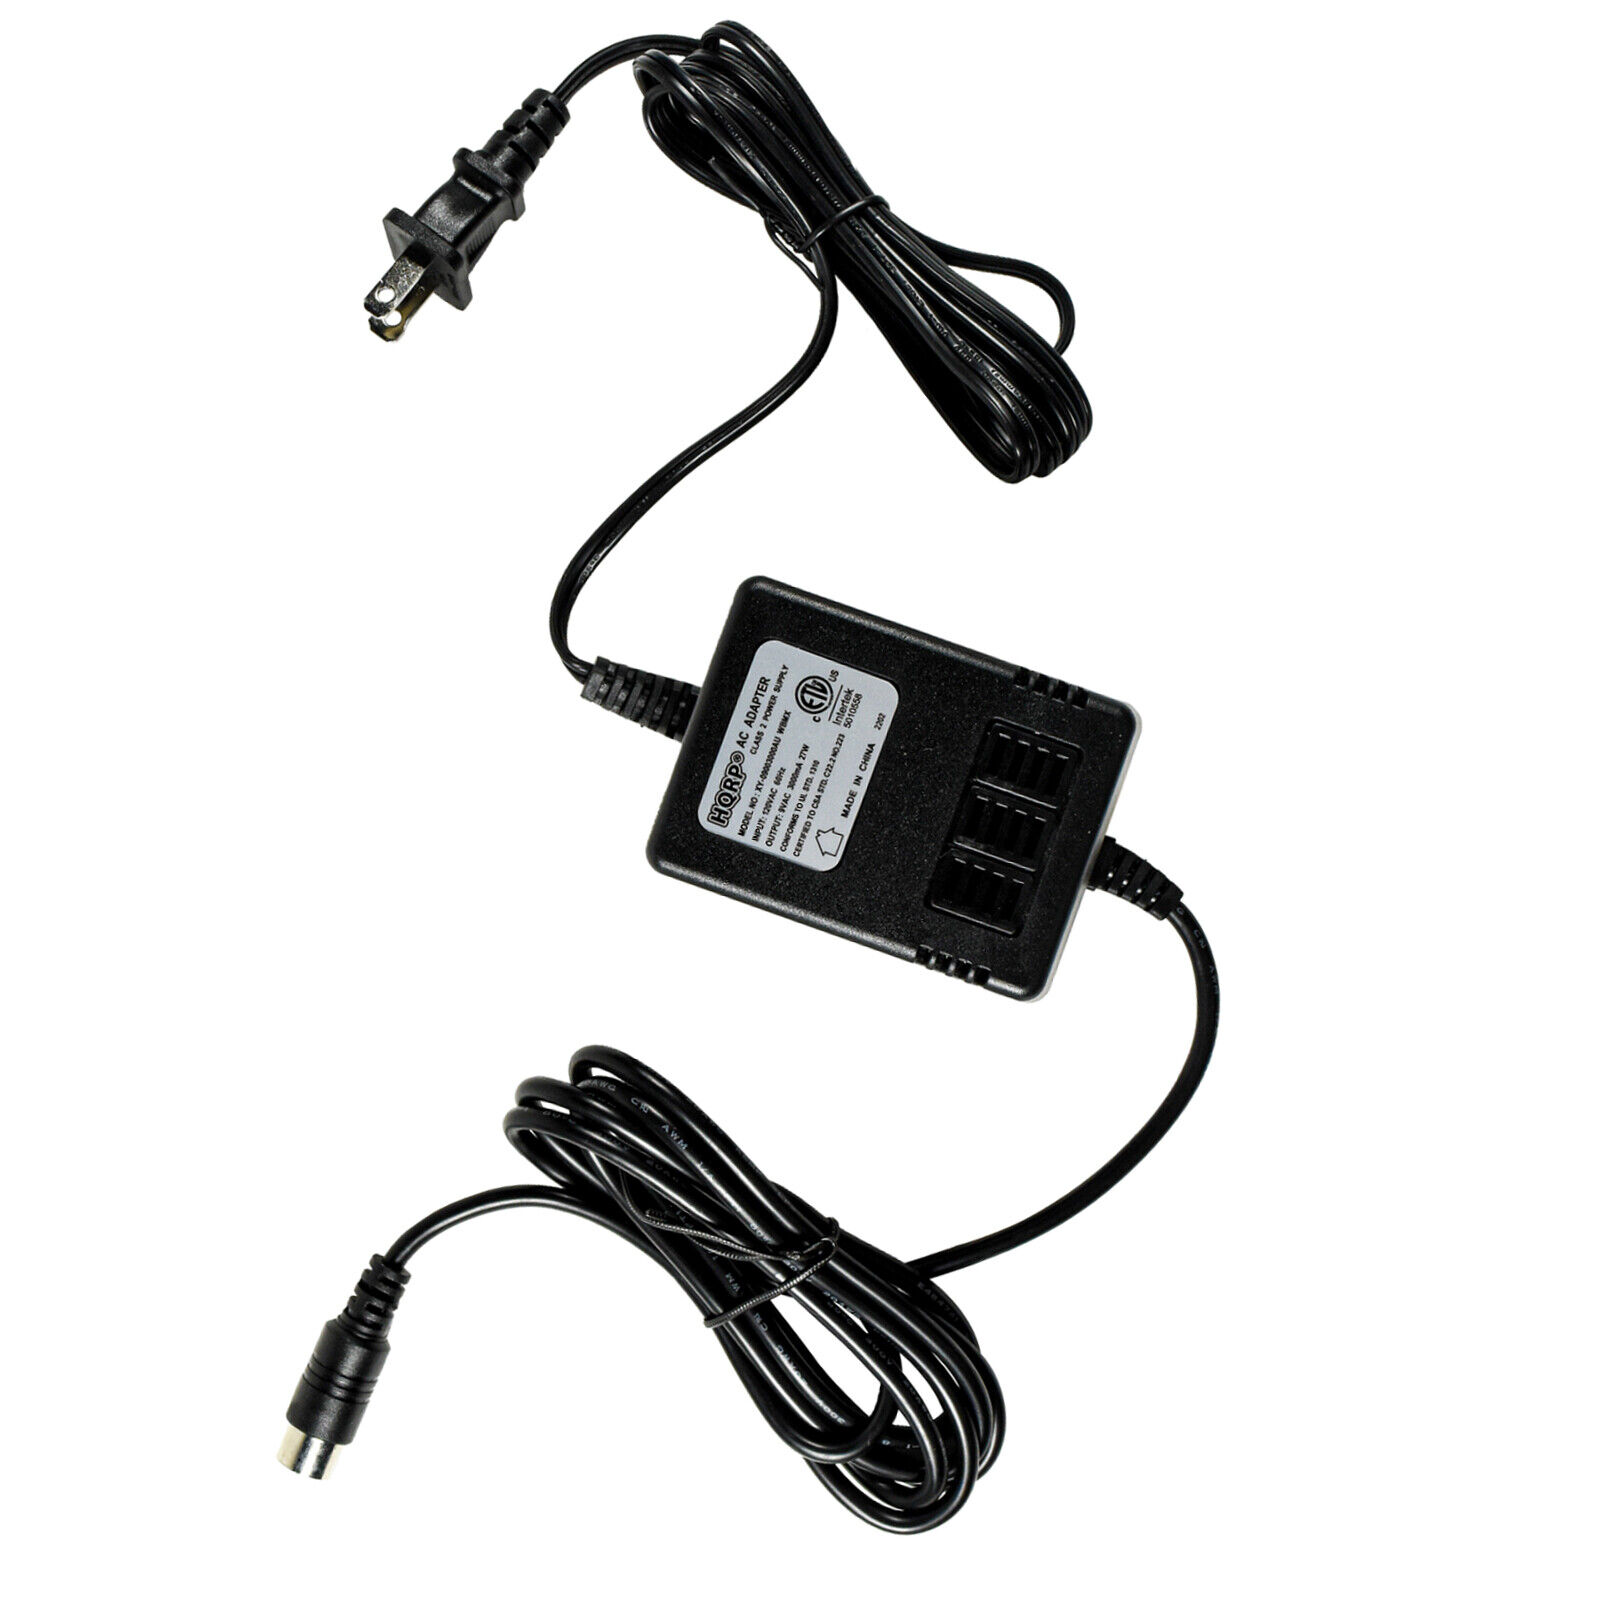 AC Adapter Power Supply for Korg Mixer Synthesizer Piano Recording Studio, KA163 Output 9V, 3A Connector DIN 4 pin Comp